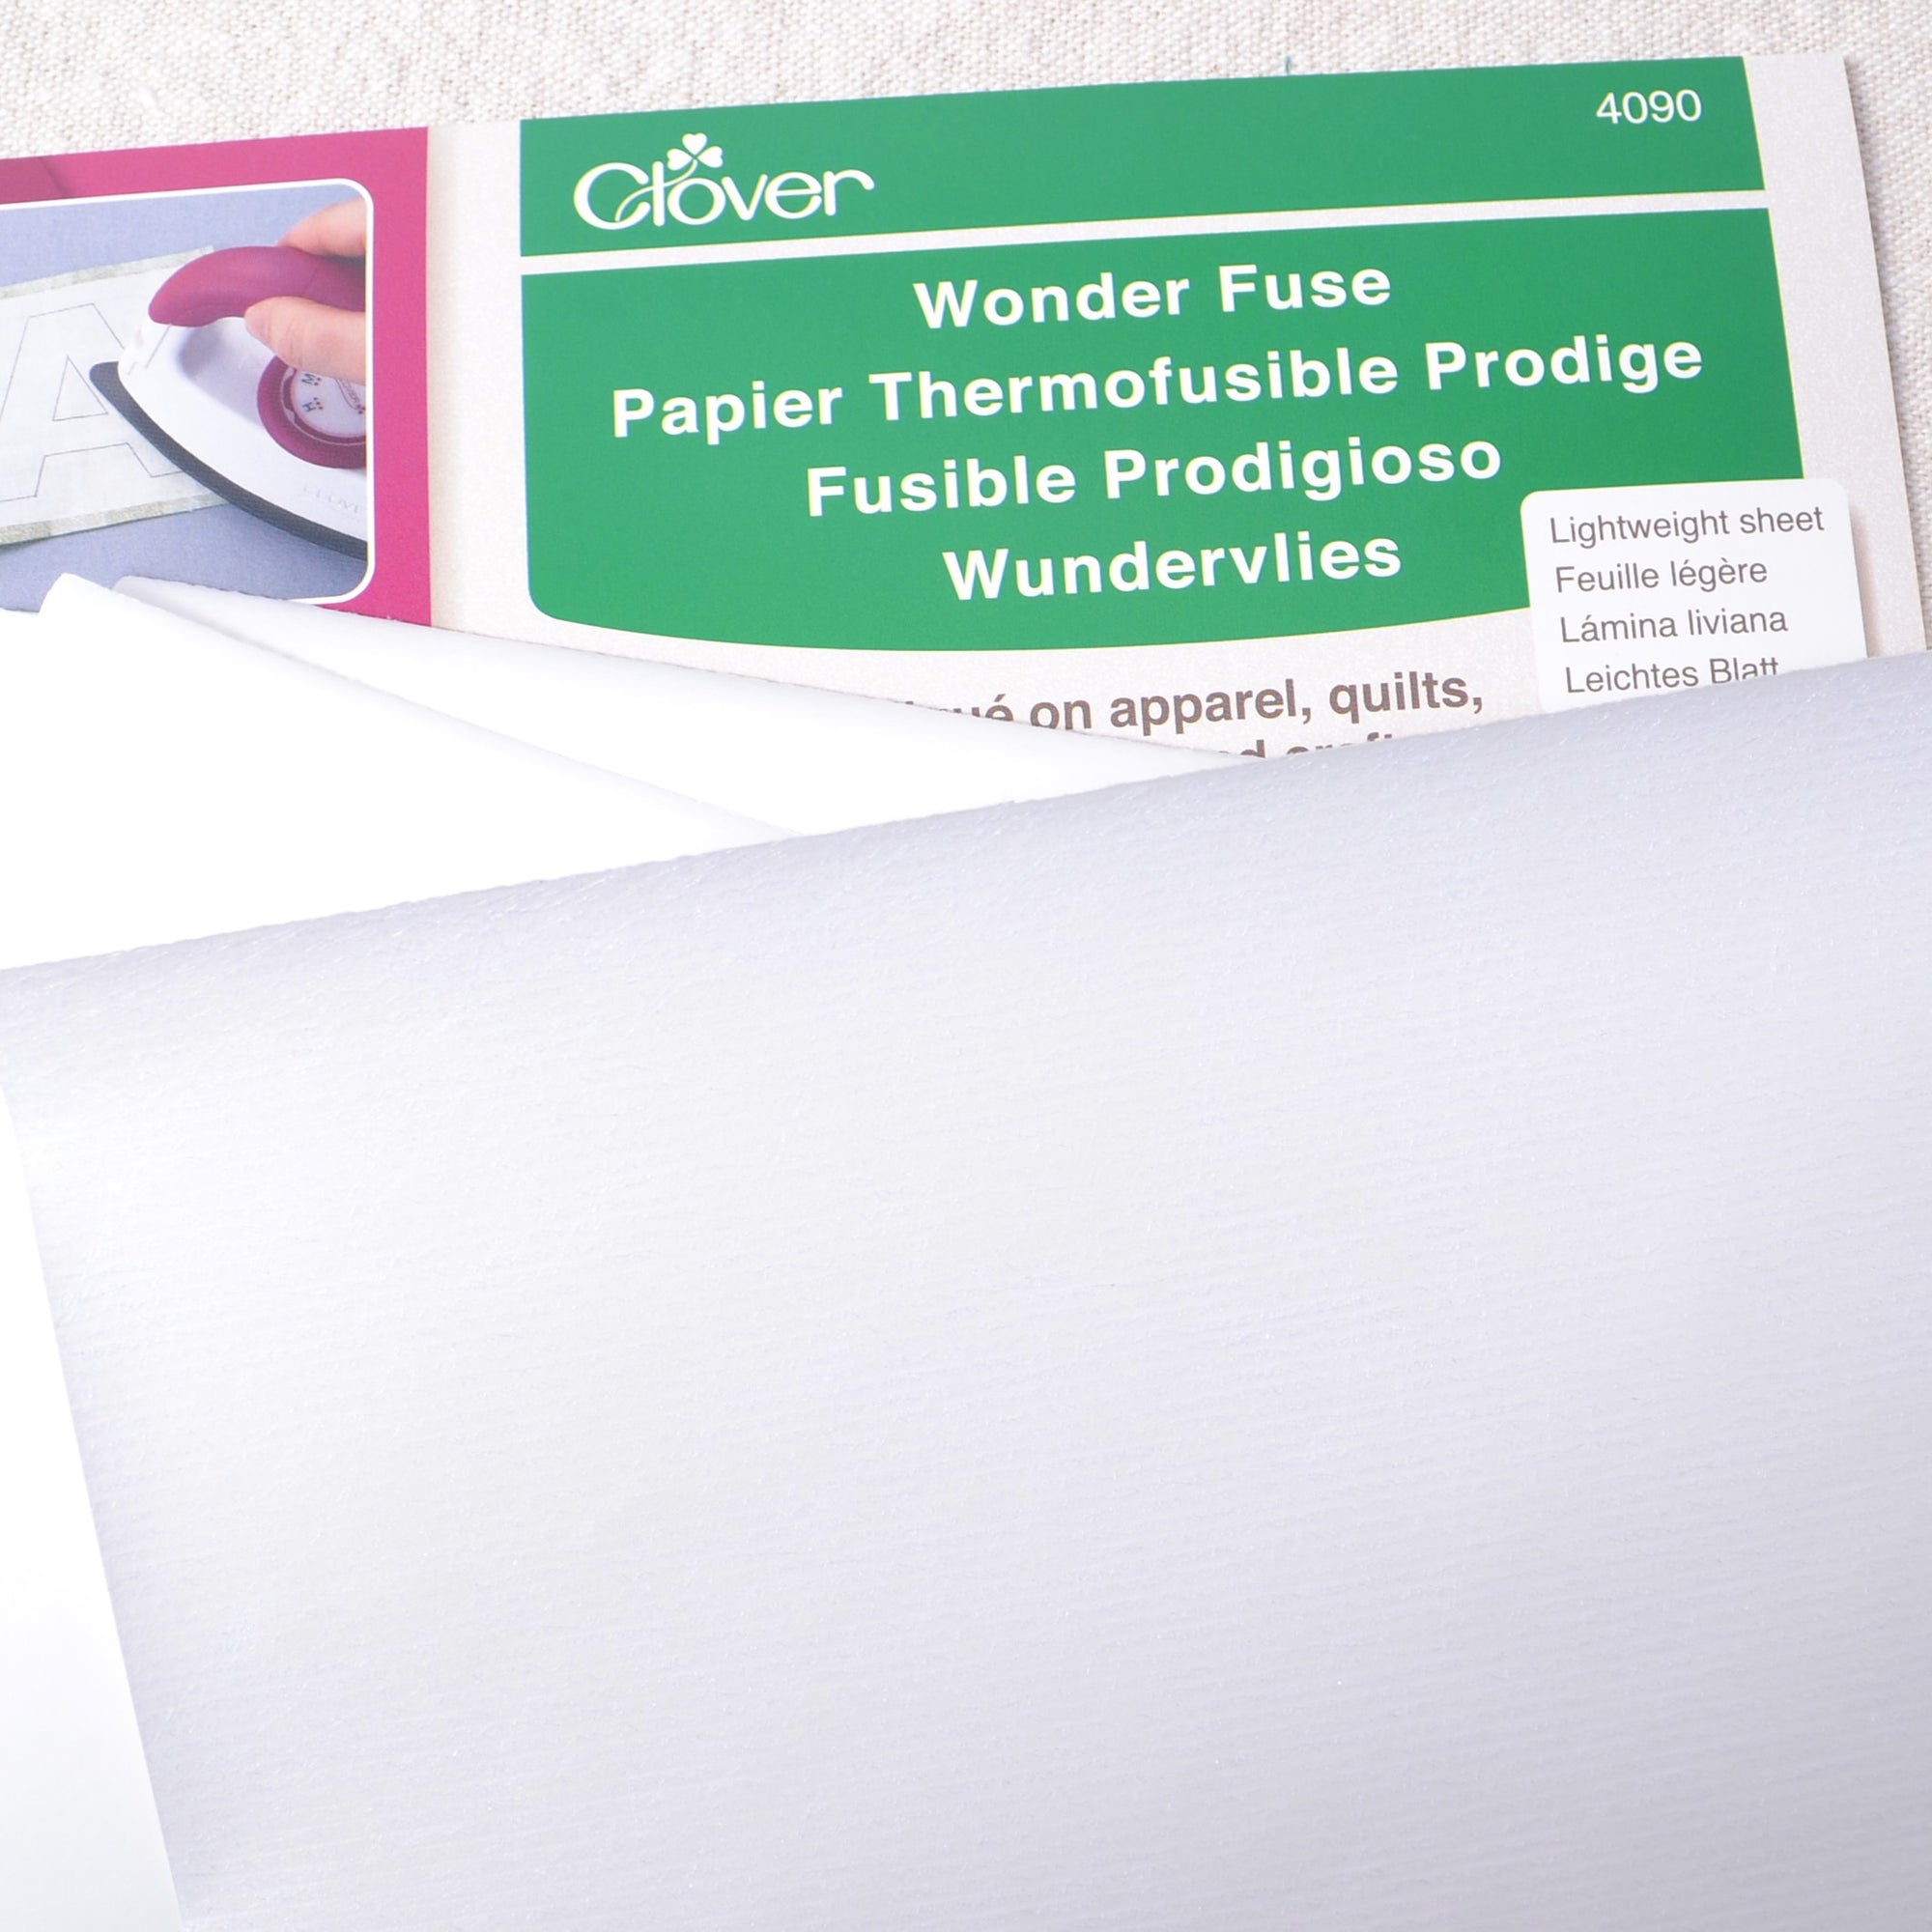 Clover Wonder Fuse, 10 Page Package